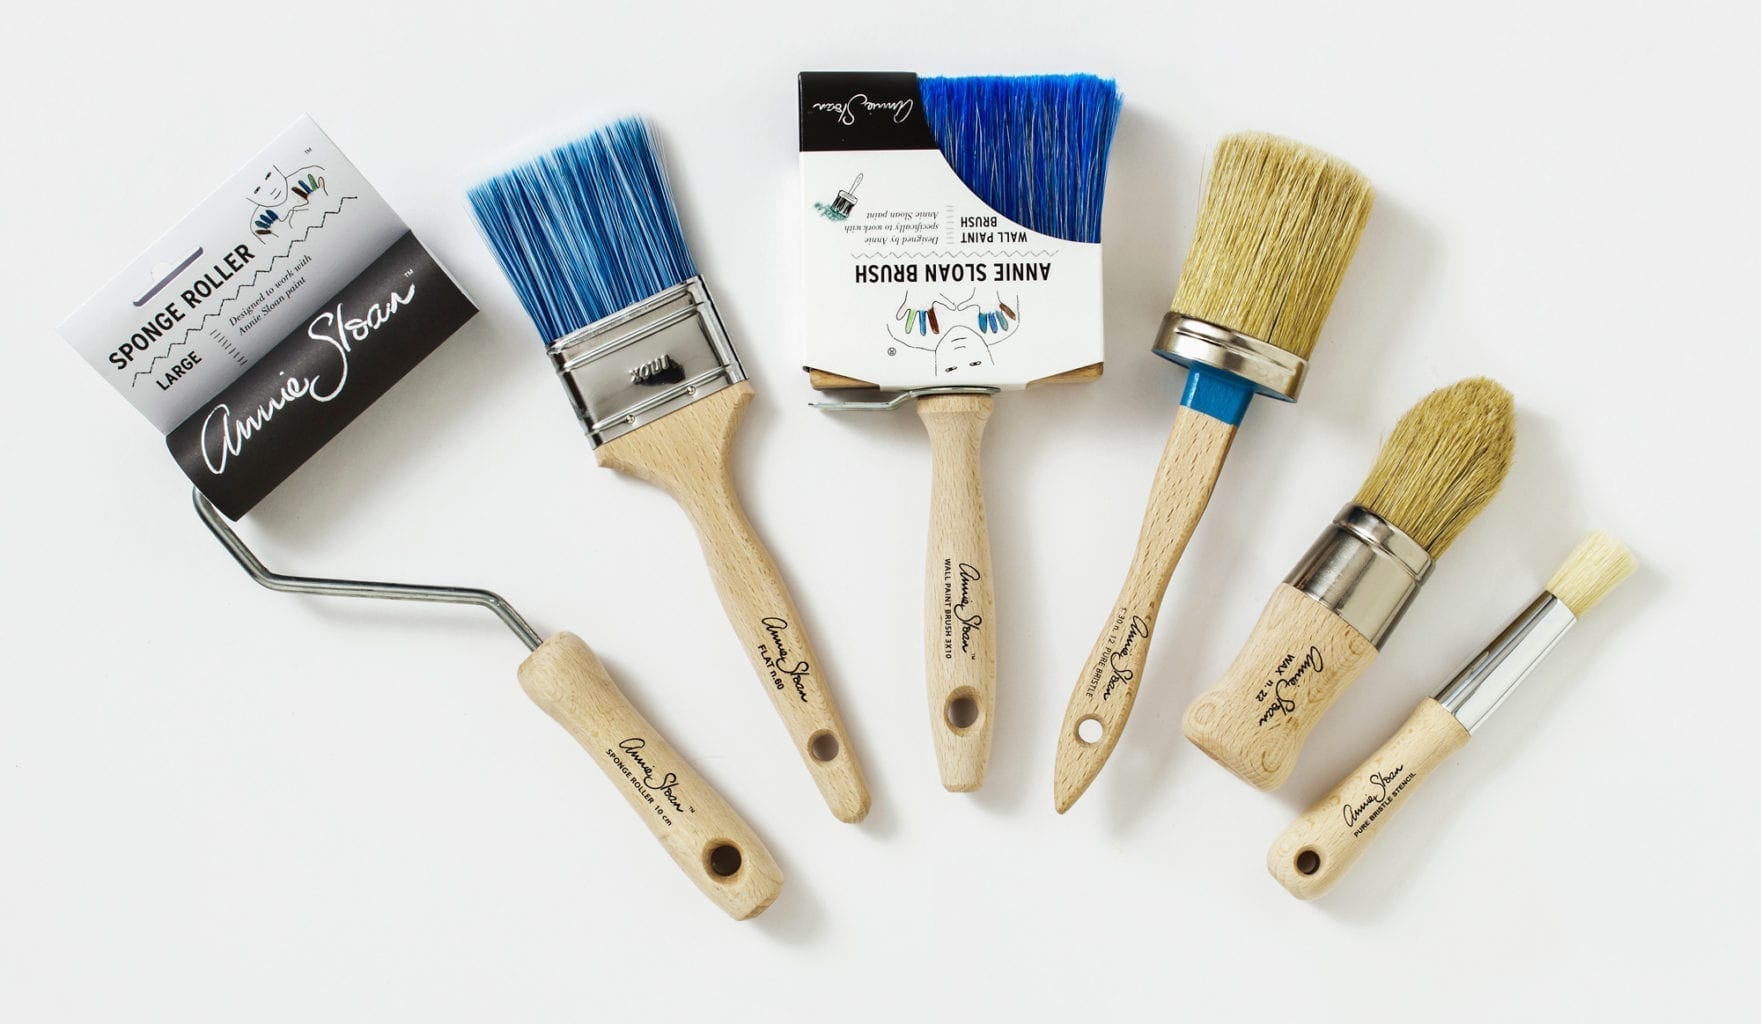 Brushes and Tools by Annie Sloan